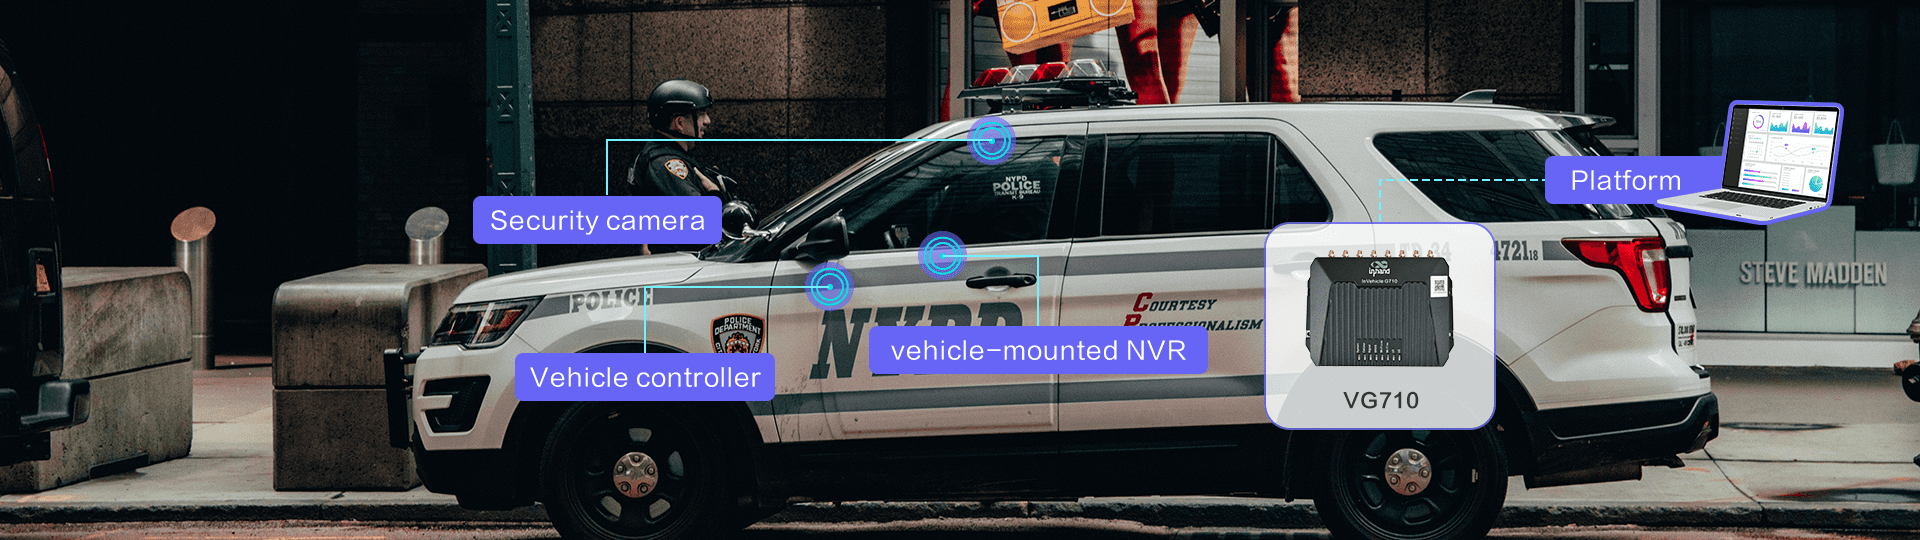 InHand's Solution for Municipal and Public Safety